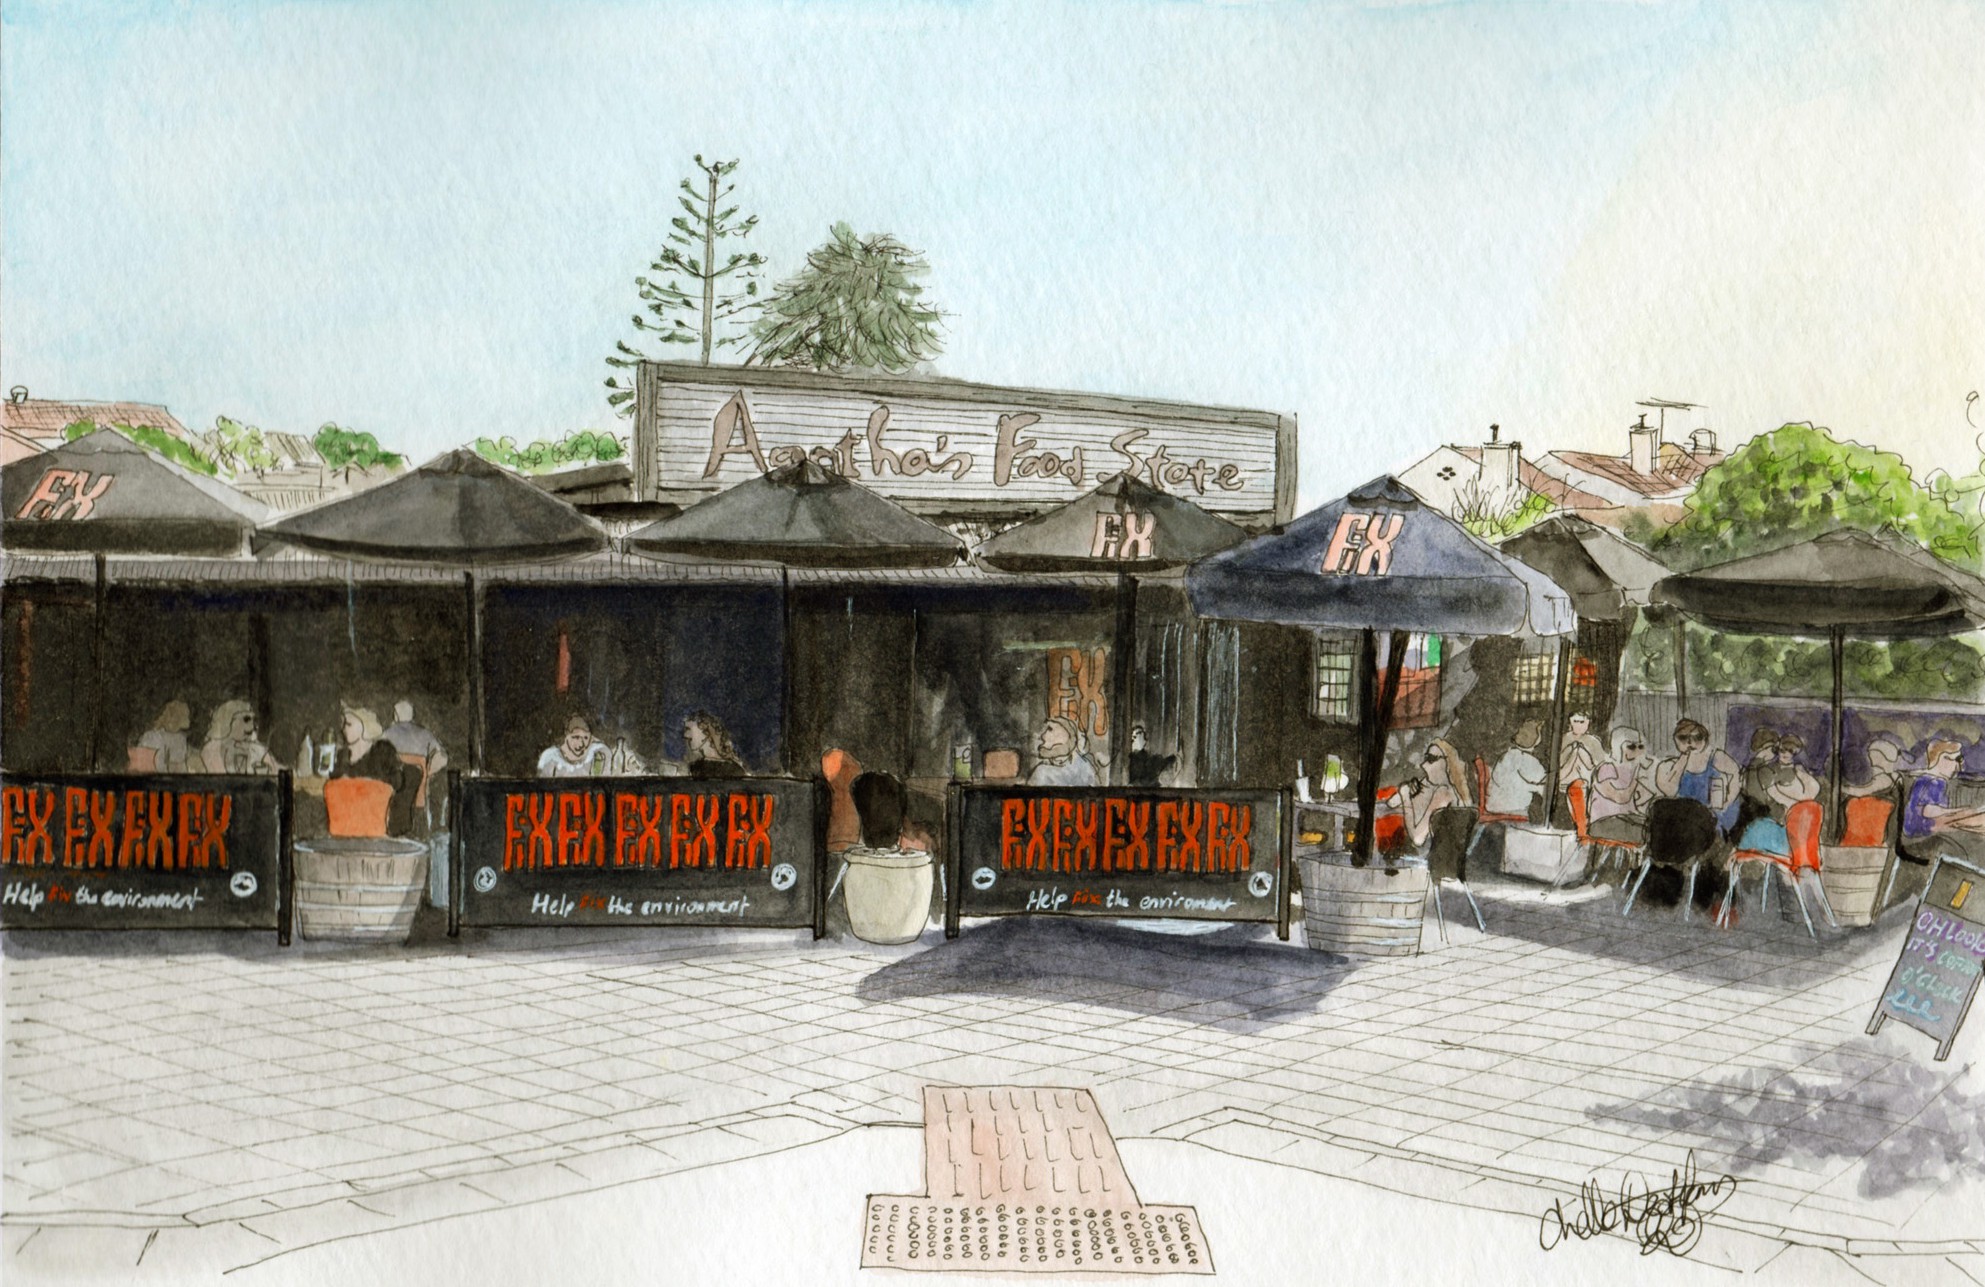 A watercolour picture of Agatha's Food Store cafe in Port Noarlunga by Chelle Destafano.